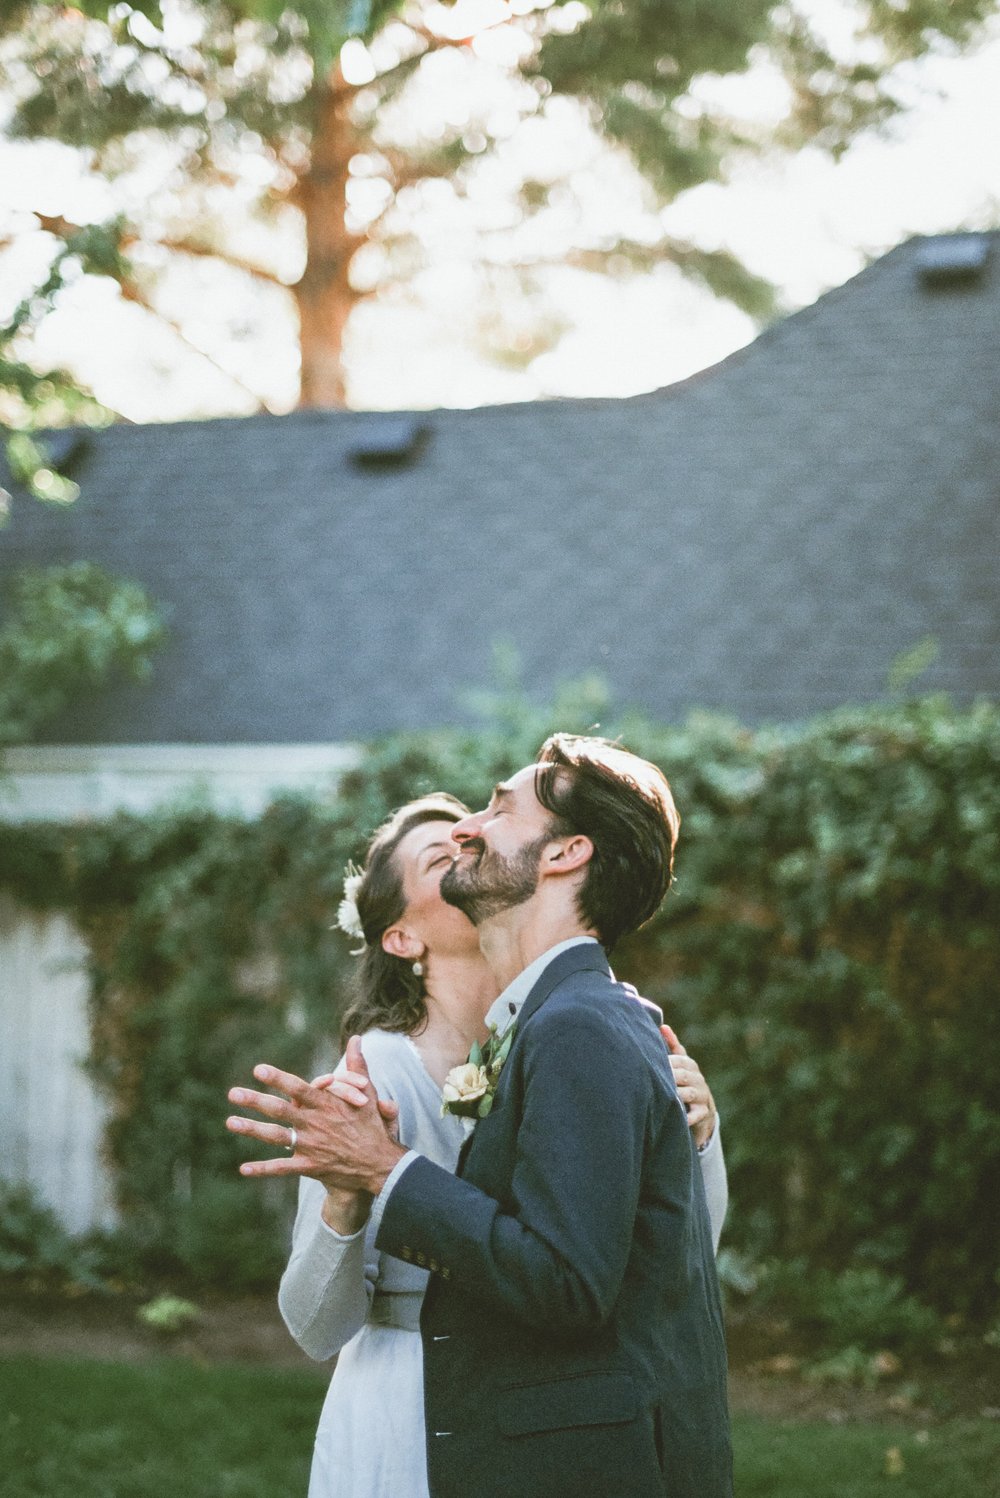 film photo bride and groom first dance bride kissing groom on cheeck groom eyes closed face tilted upward with sunlight on his hair and greenery in background